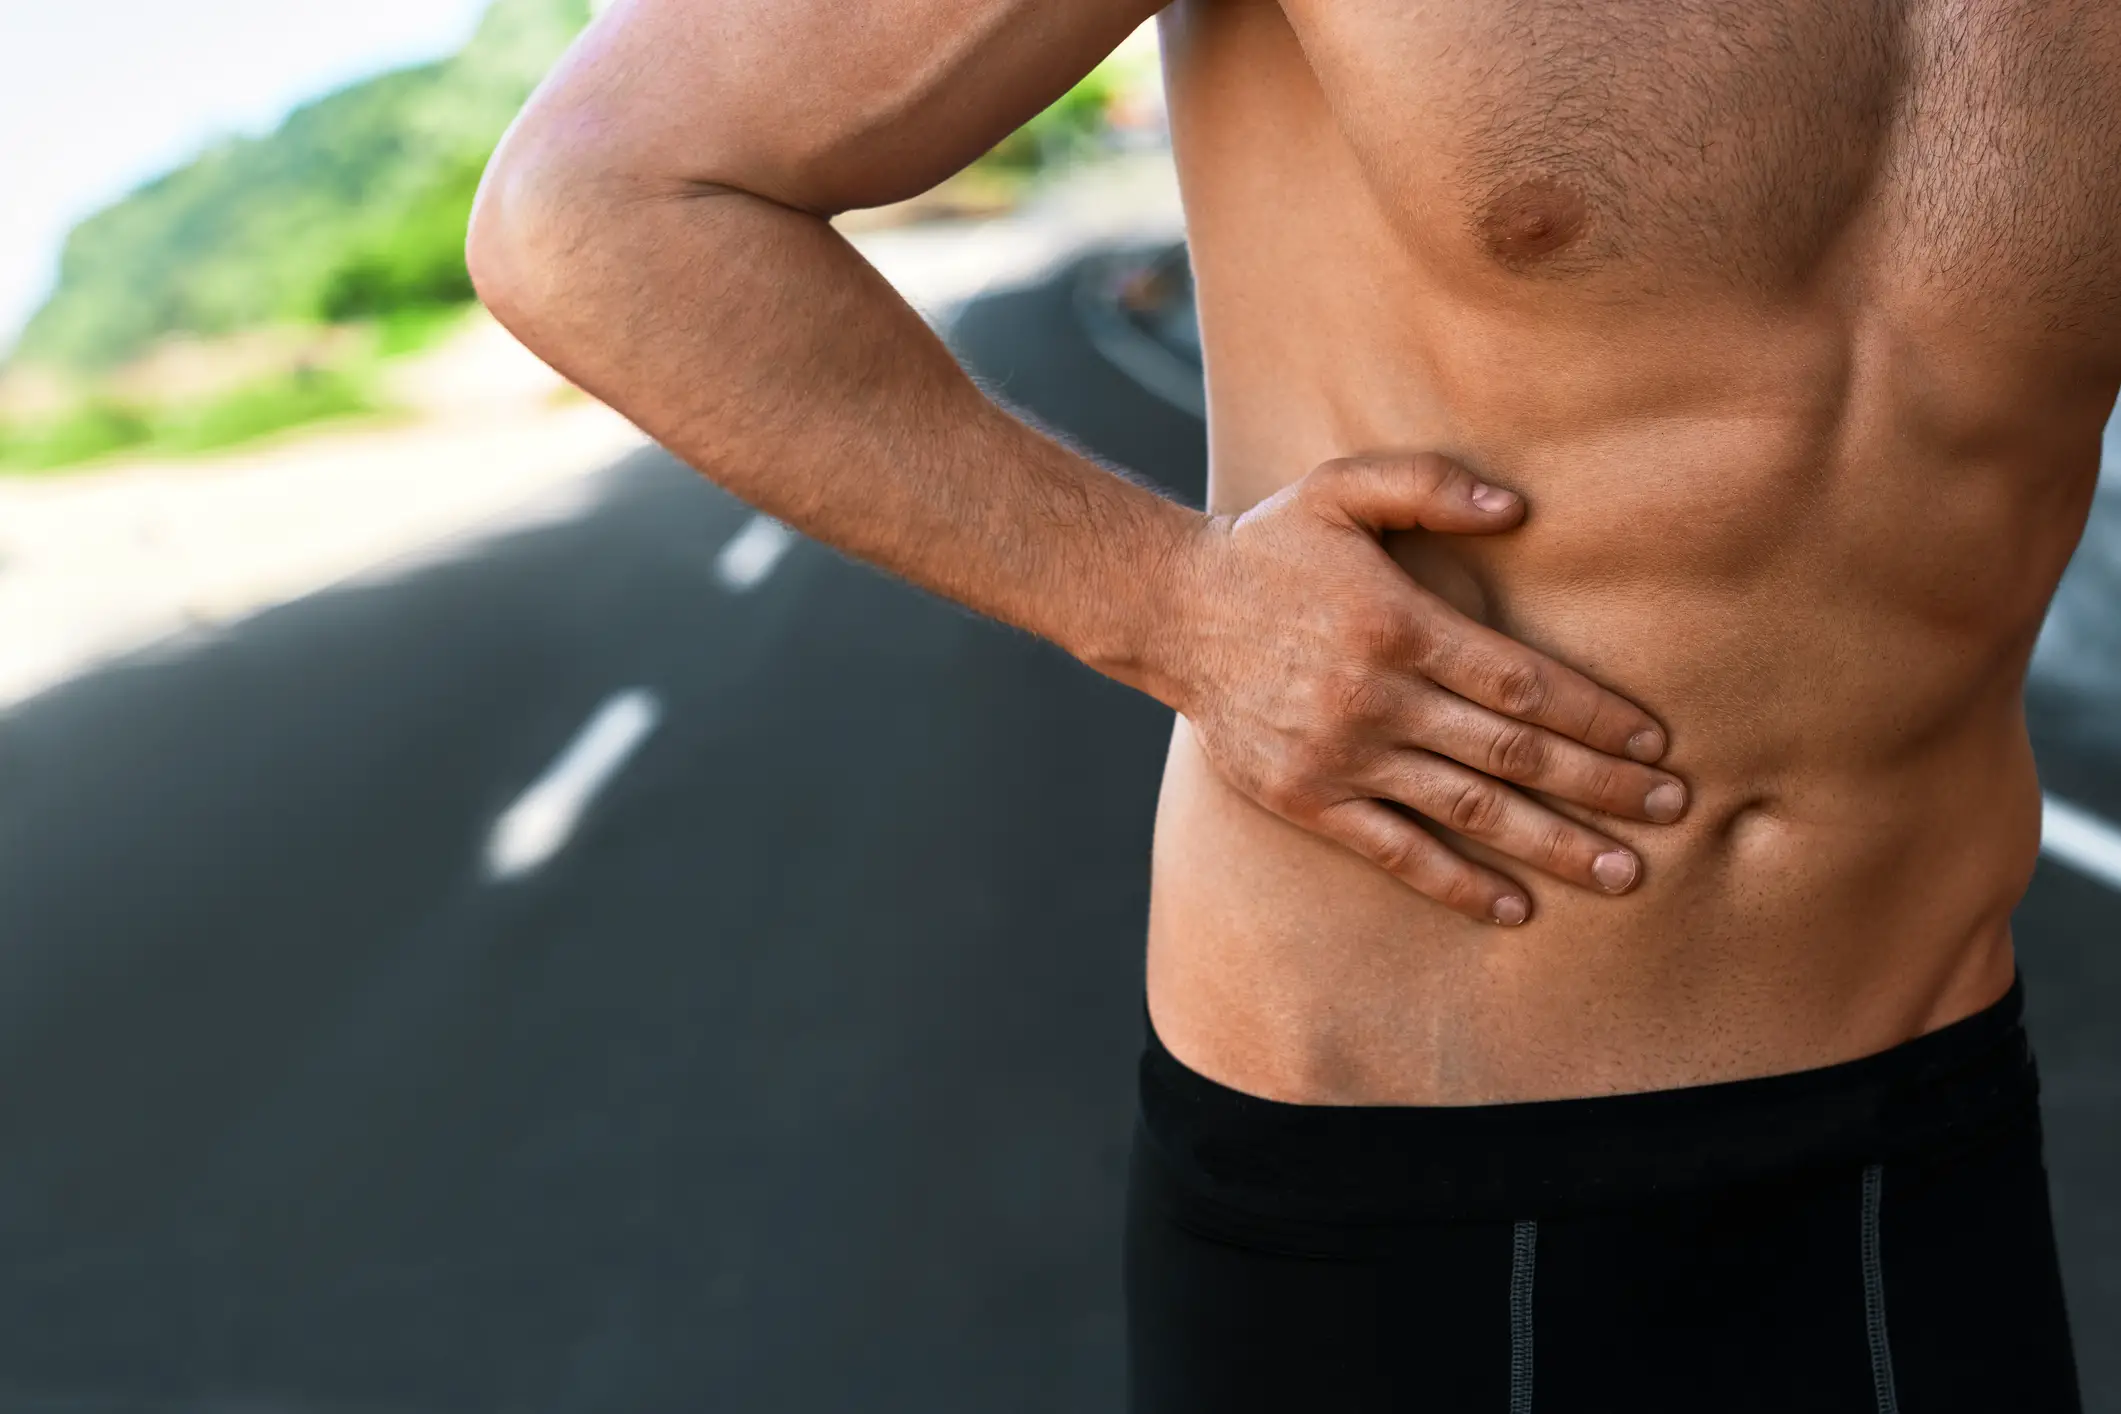 Over training can lead to pain in your stomach and your abs